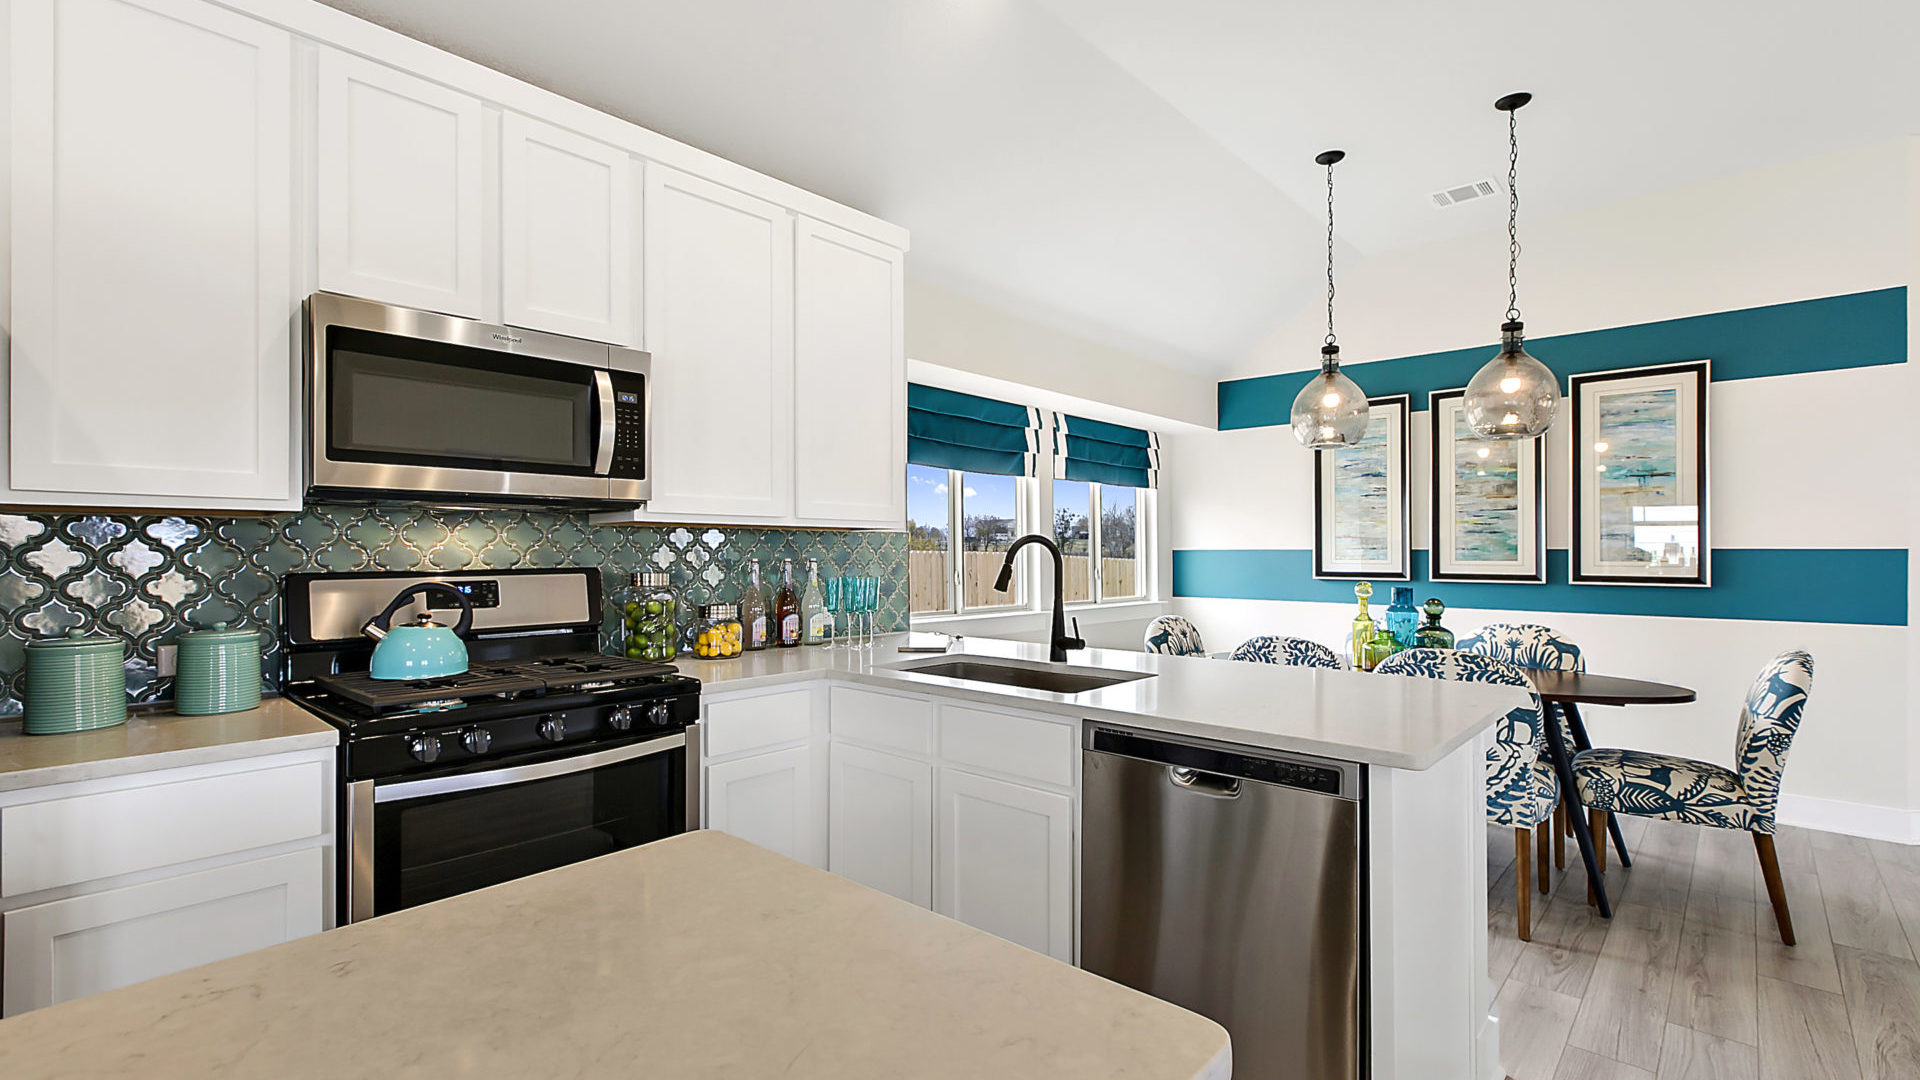 Sorento Community Model Home Kitchen And Dining Space